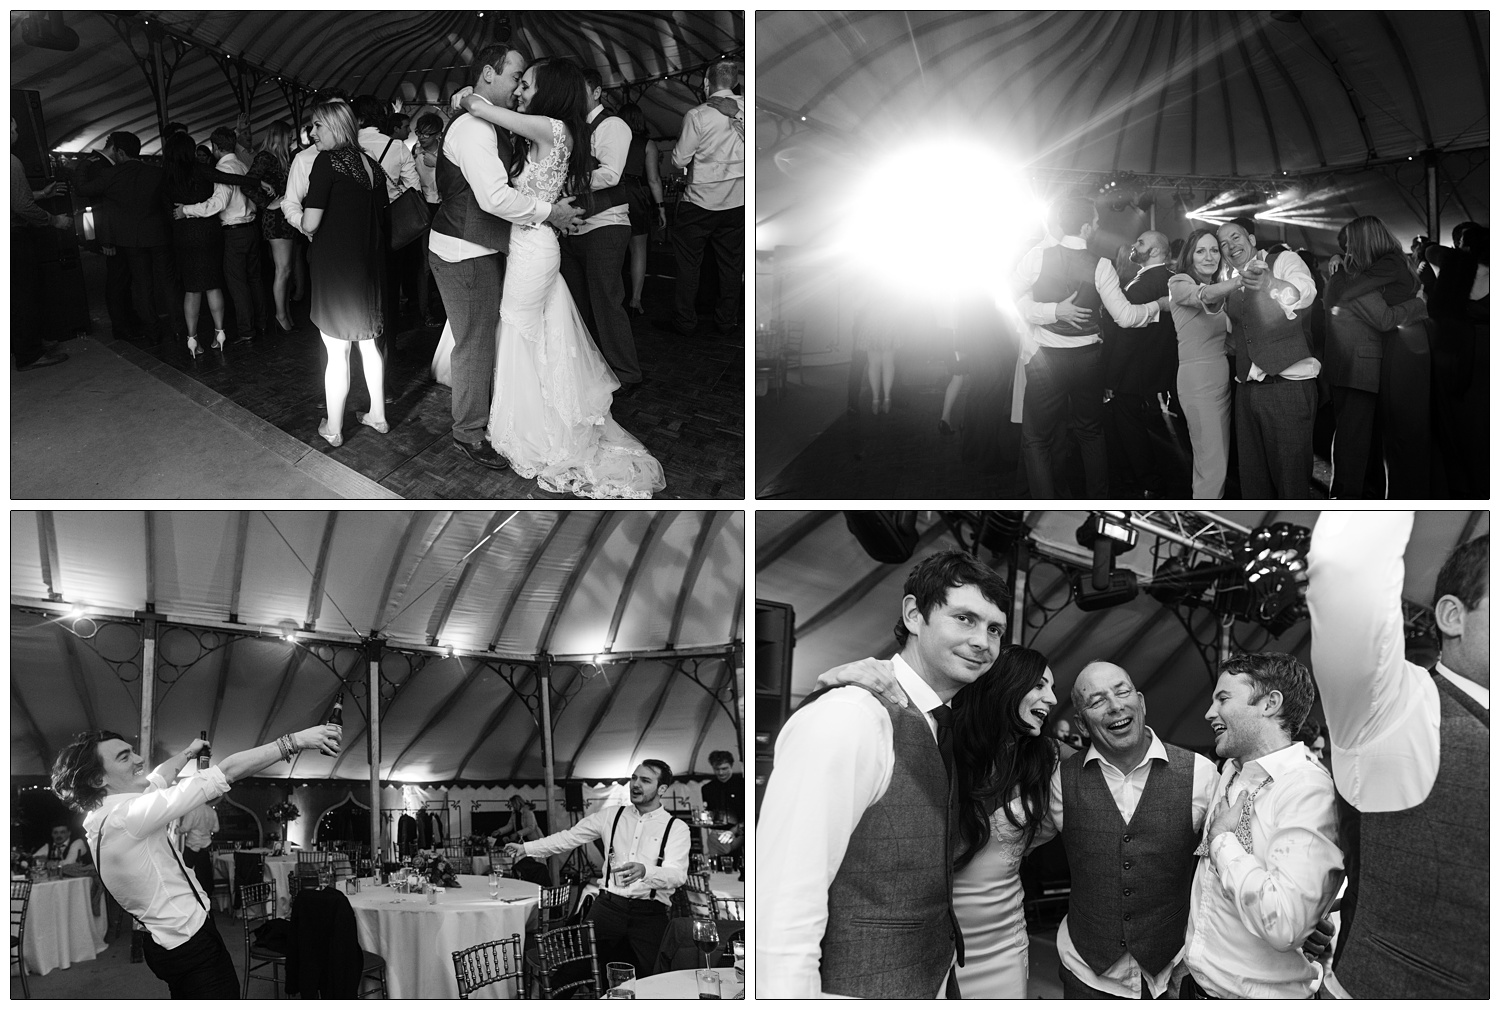 Black and white candid style photography of people late at night at a wedding in winter. They are dancing.